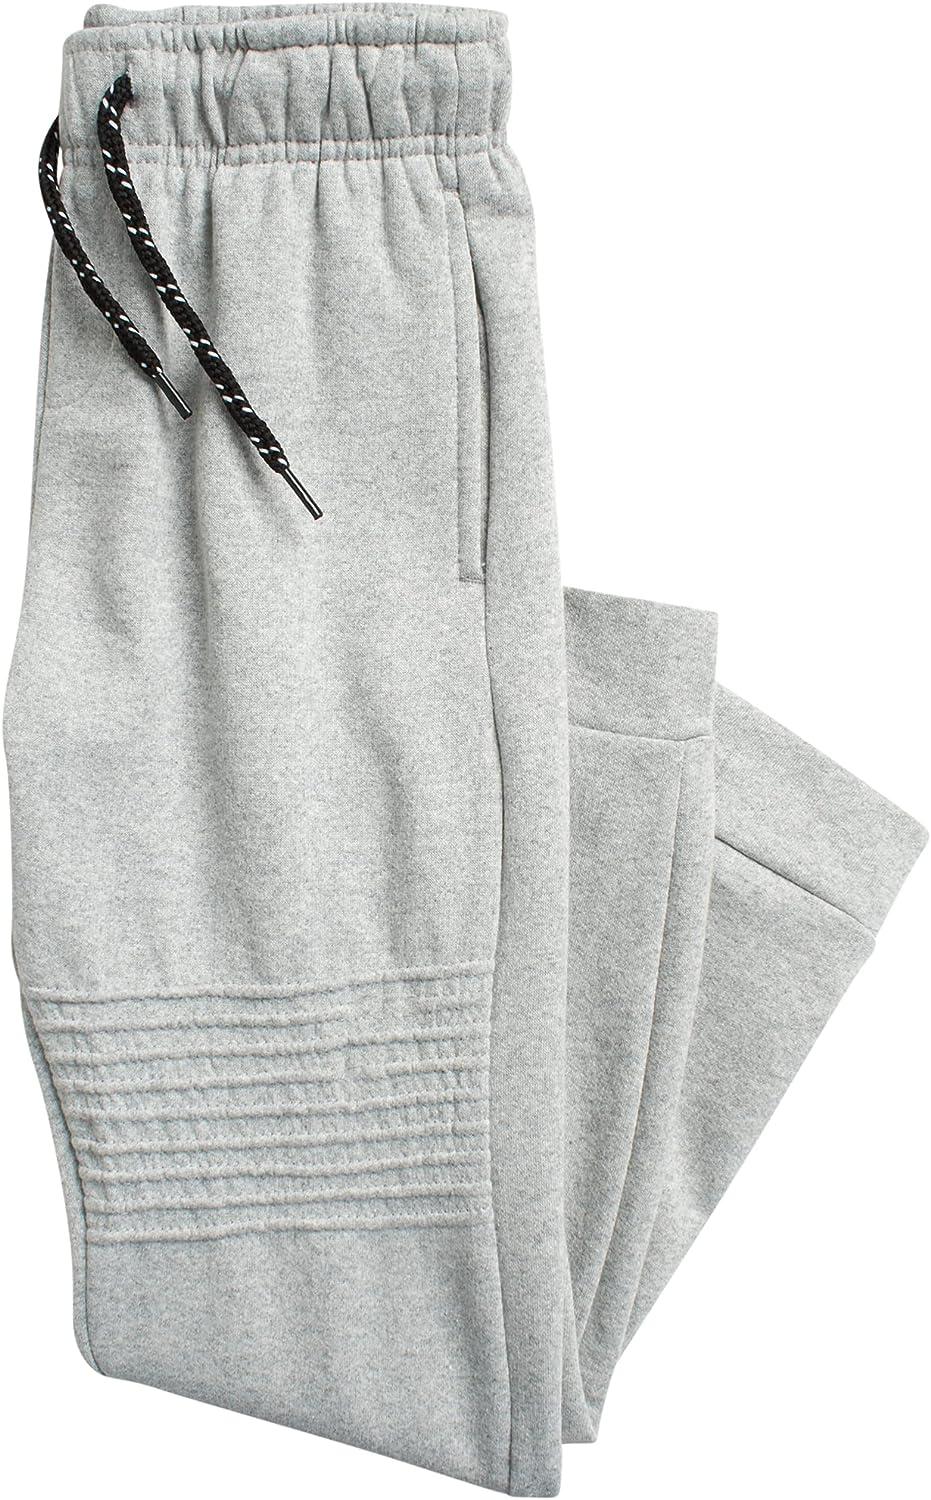 Express, High Waisted Fleece Jogger Pant in Silver Heather Gray